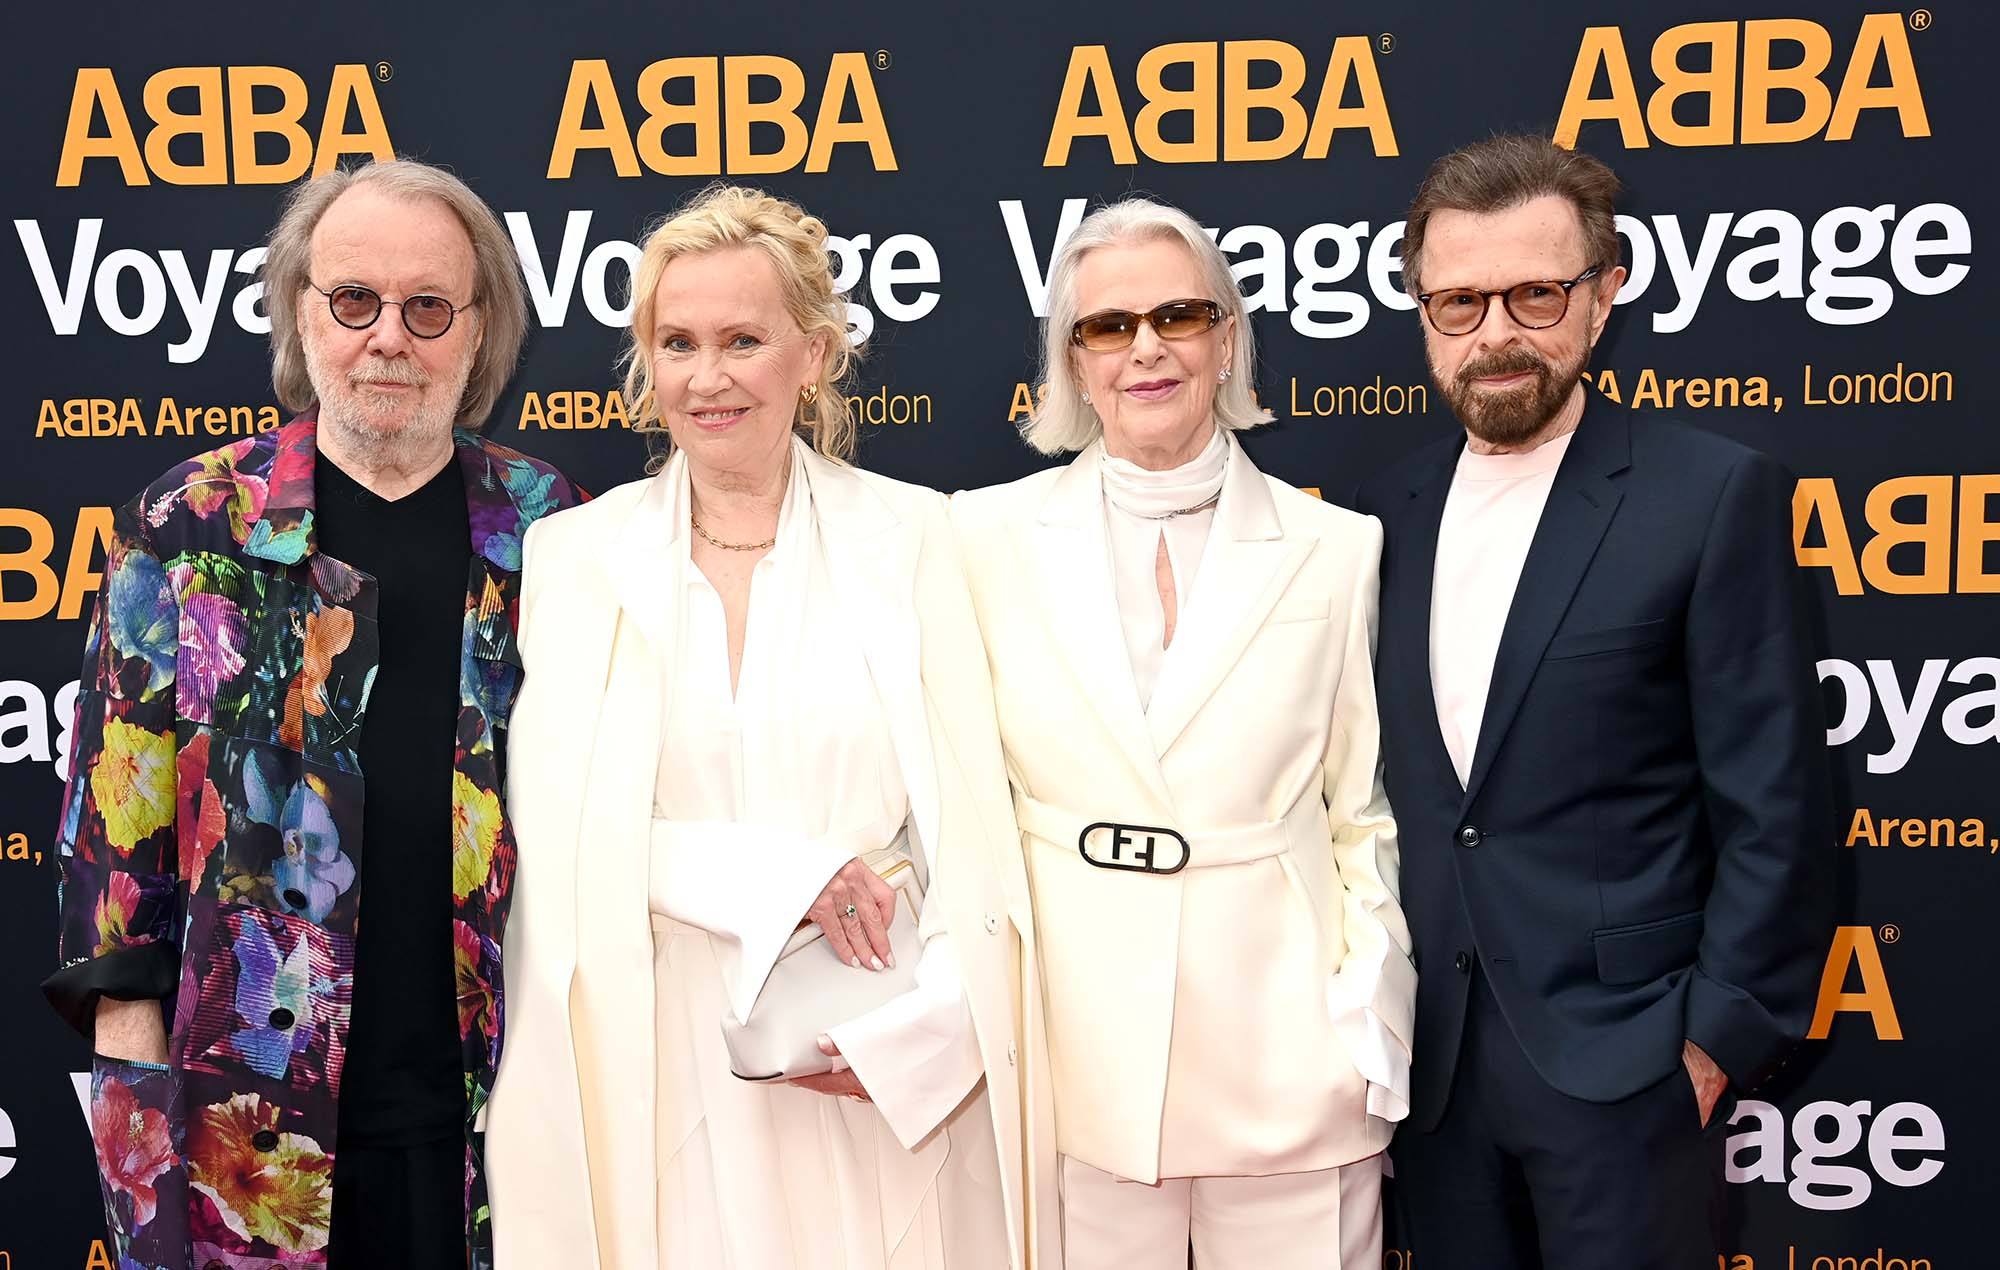 ABBA tell us what the future holds after their “surreal” and “fabulous” digital concert tour